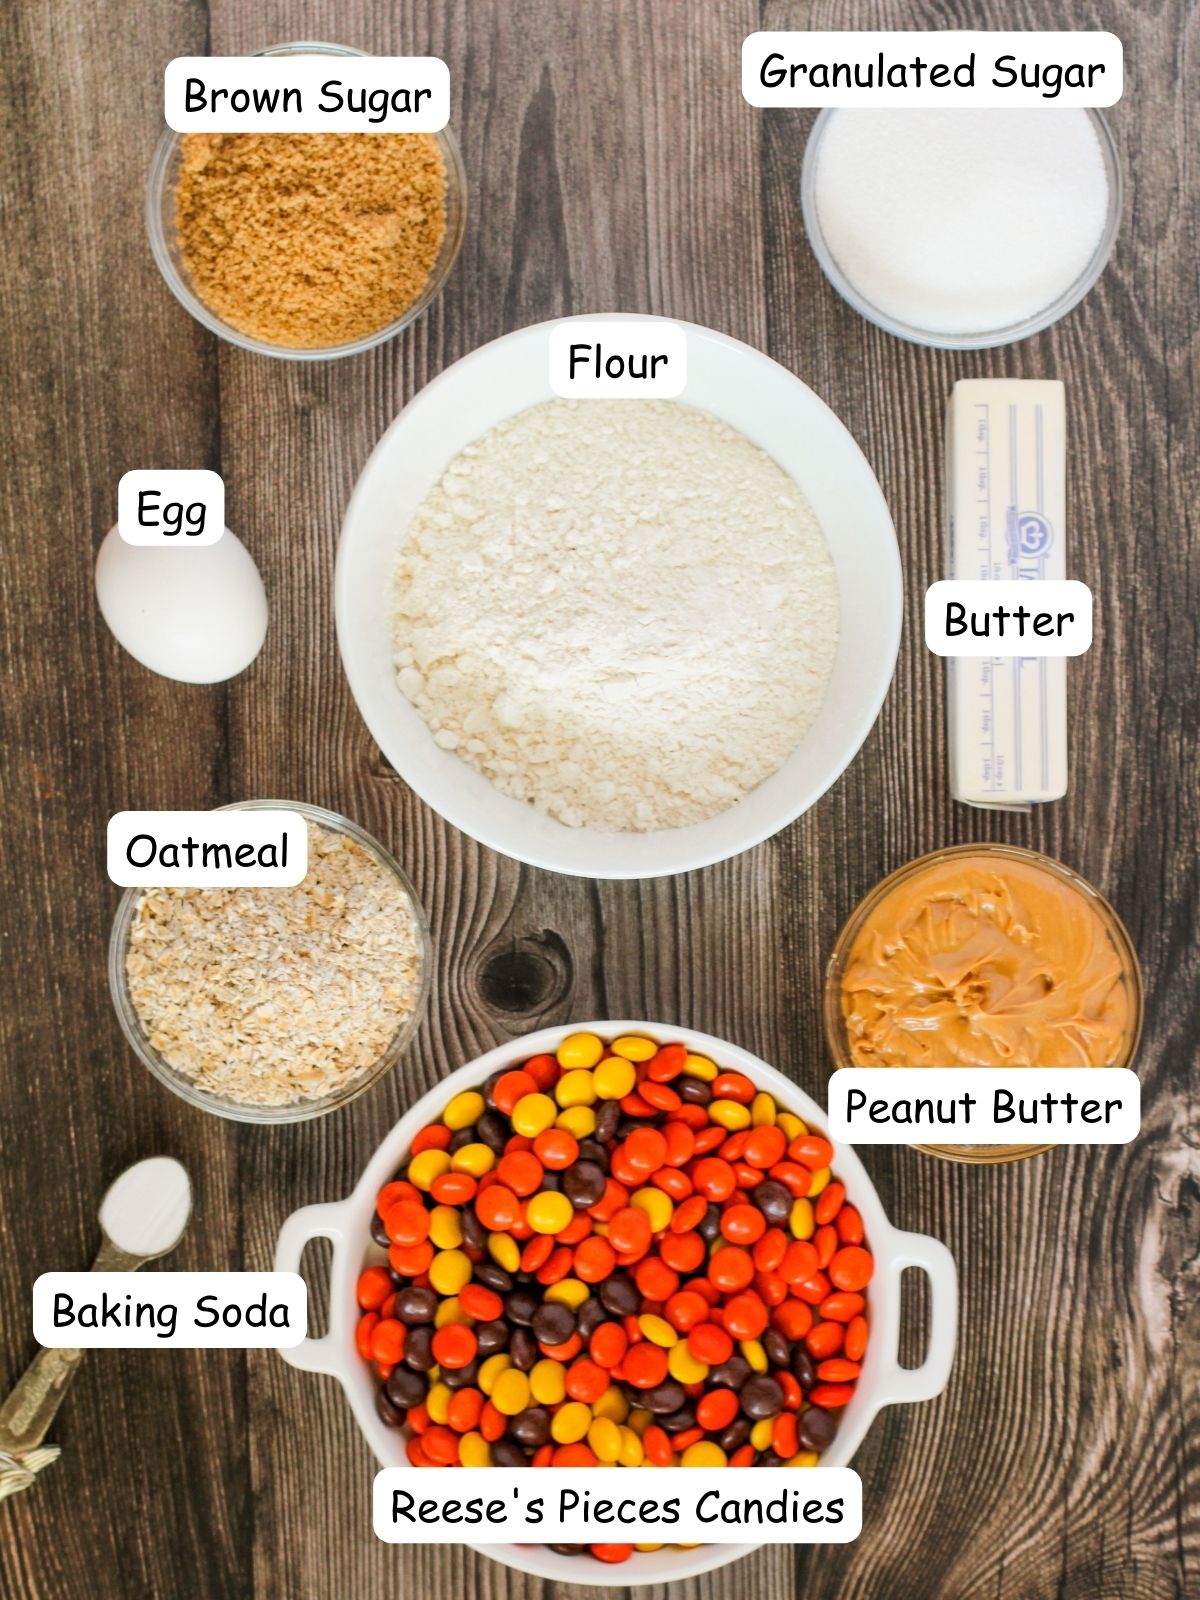 Ingredients for Halloween Cookies with Reese's Candy pieces.